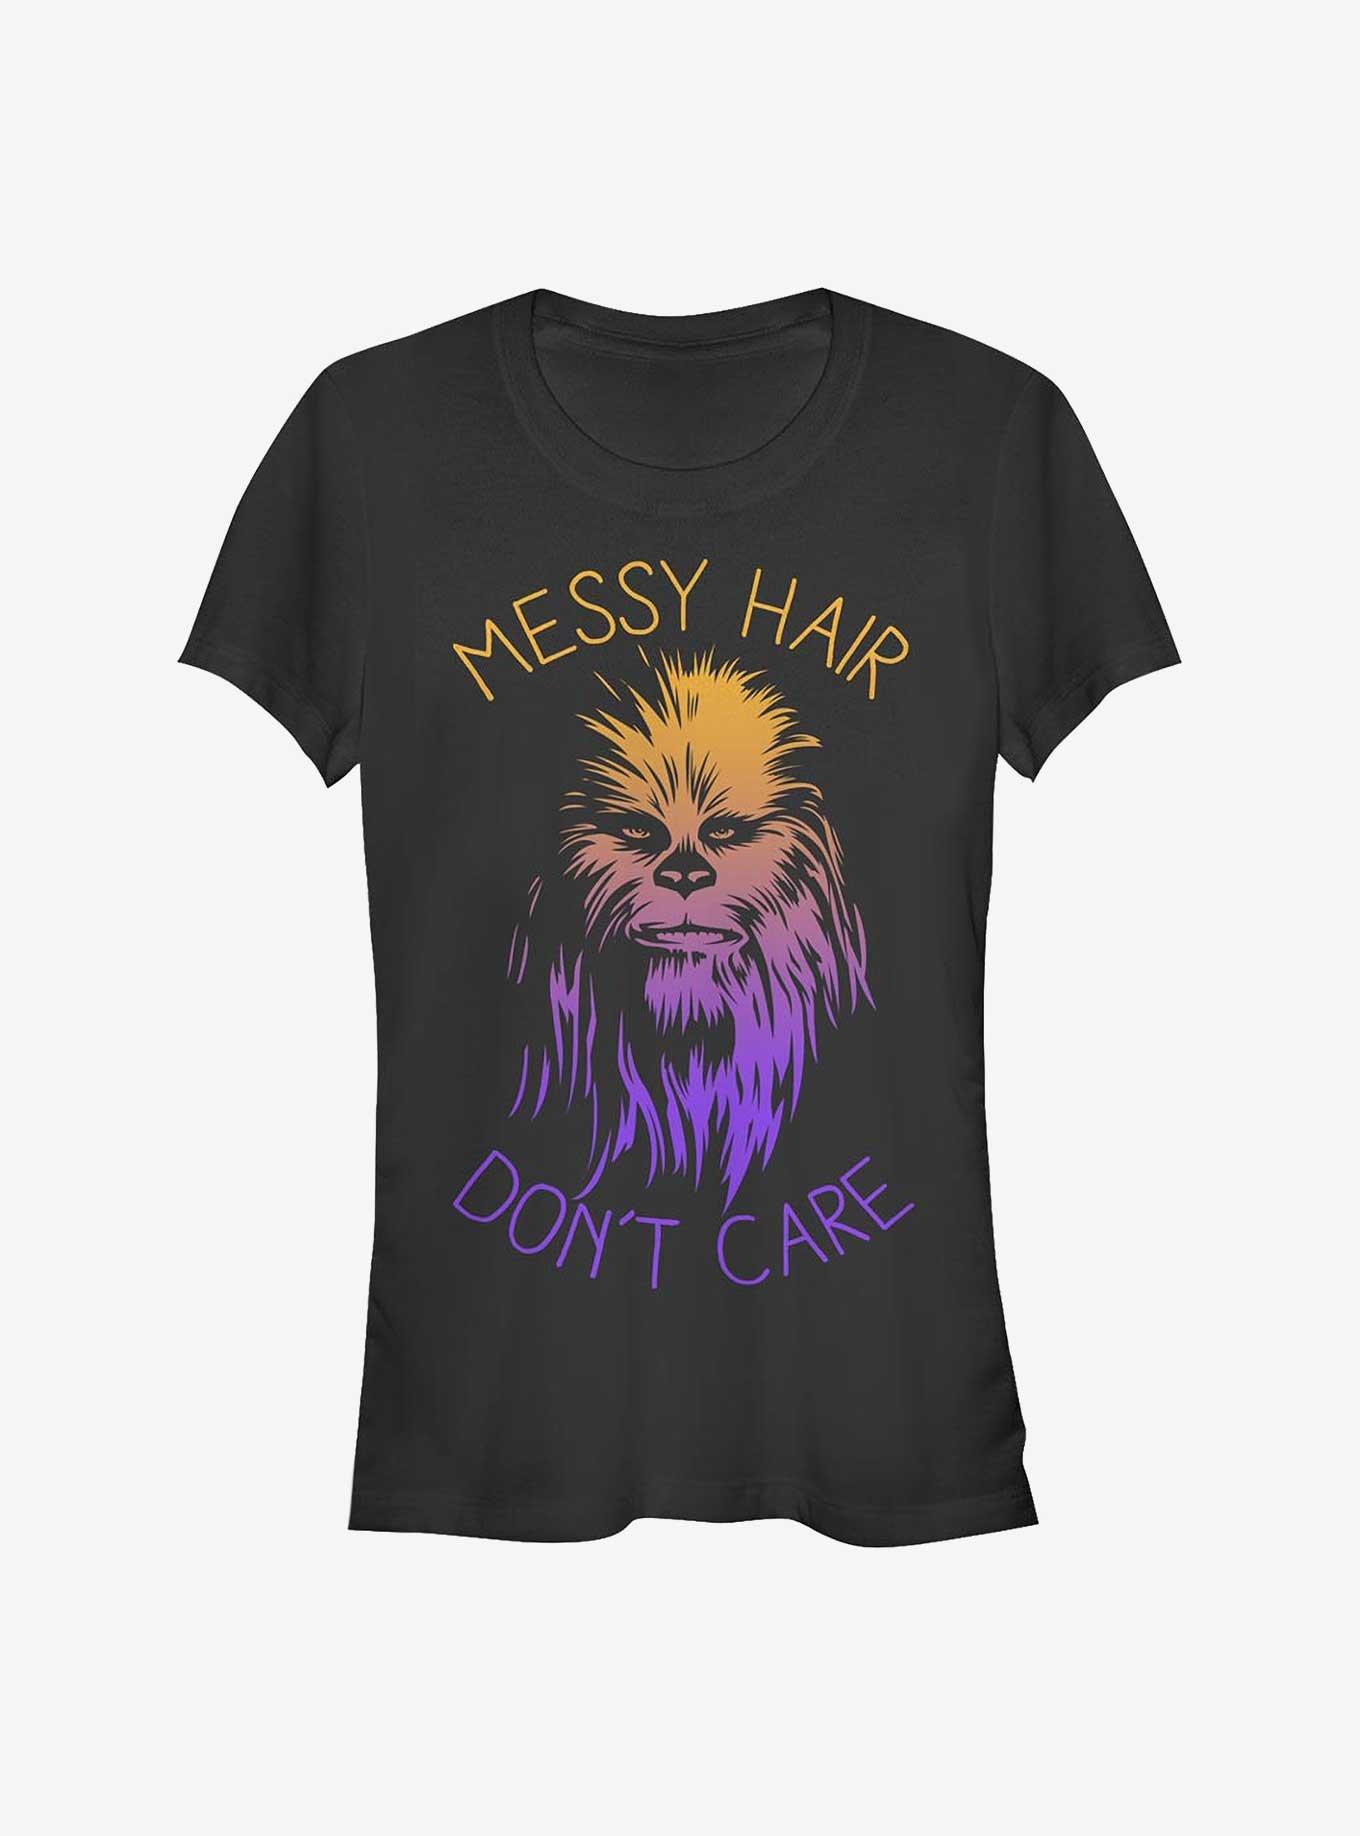 Star Wars Messy Hair Don't Care Chewbacca Girls T-Shirt